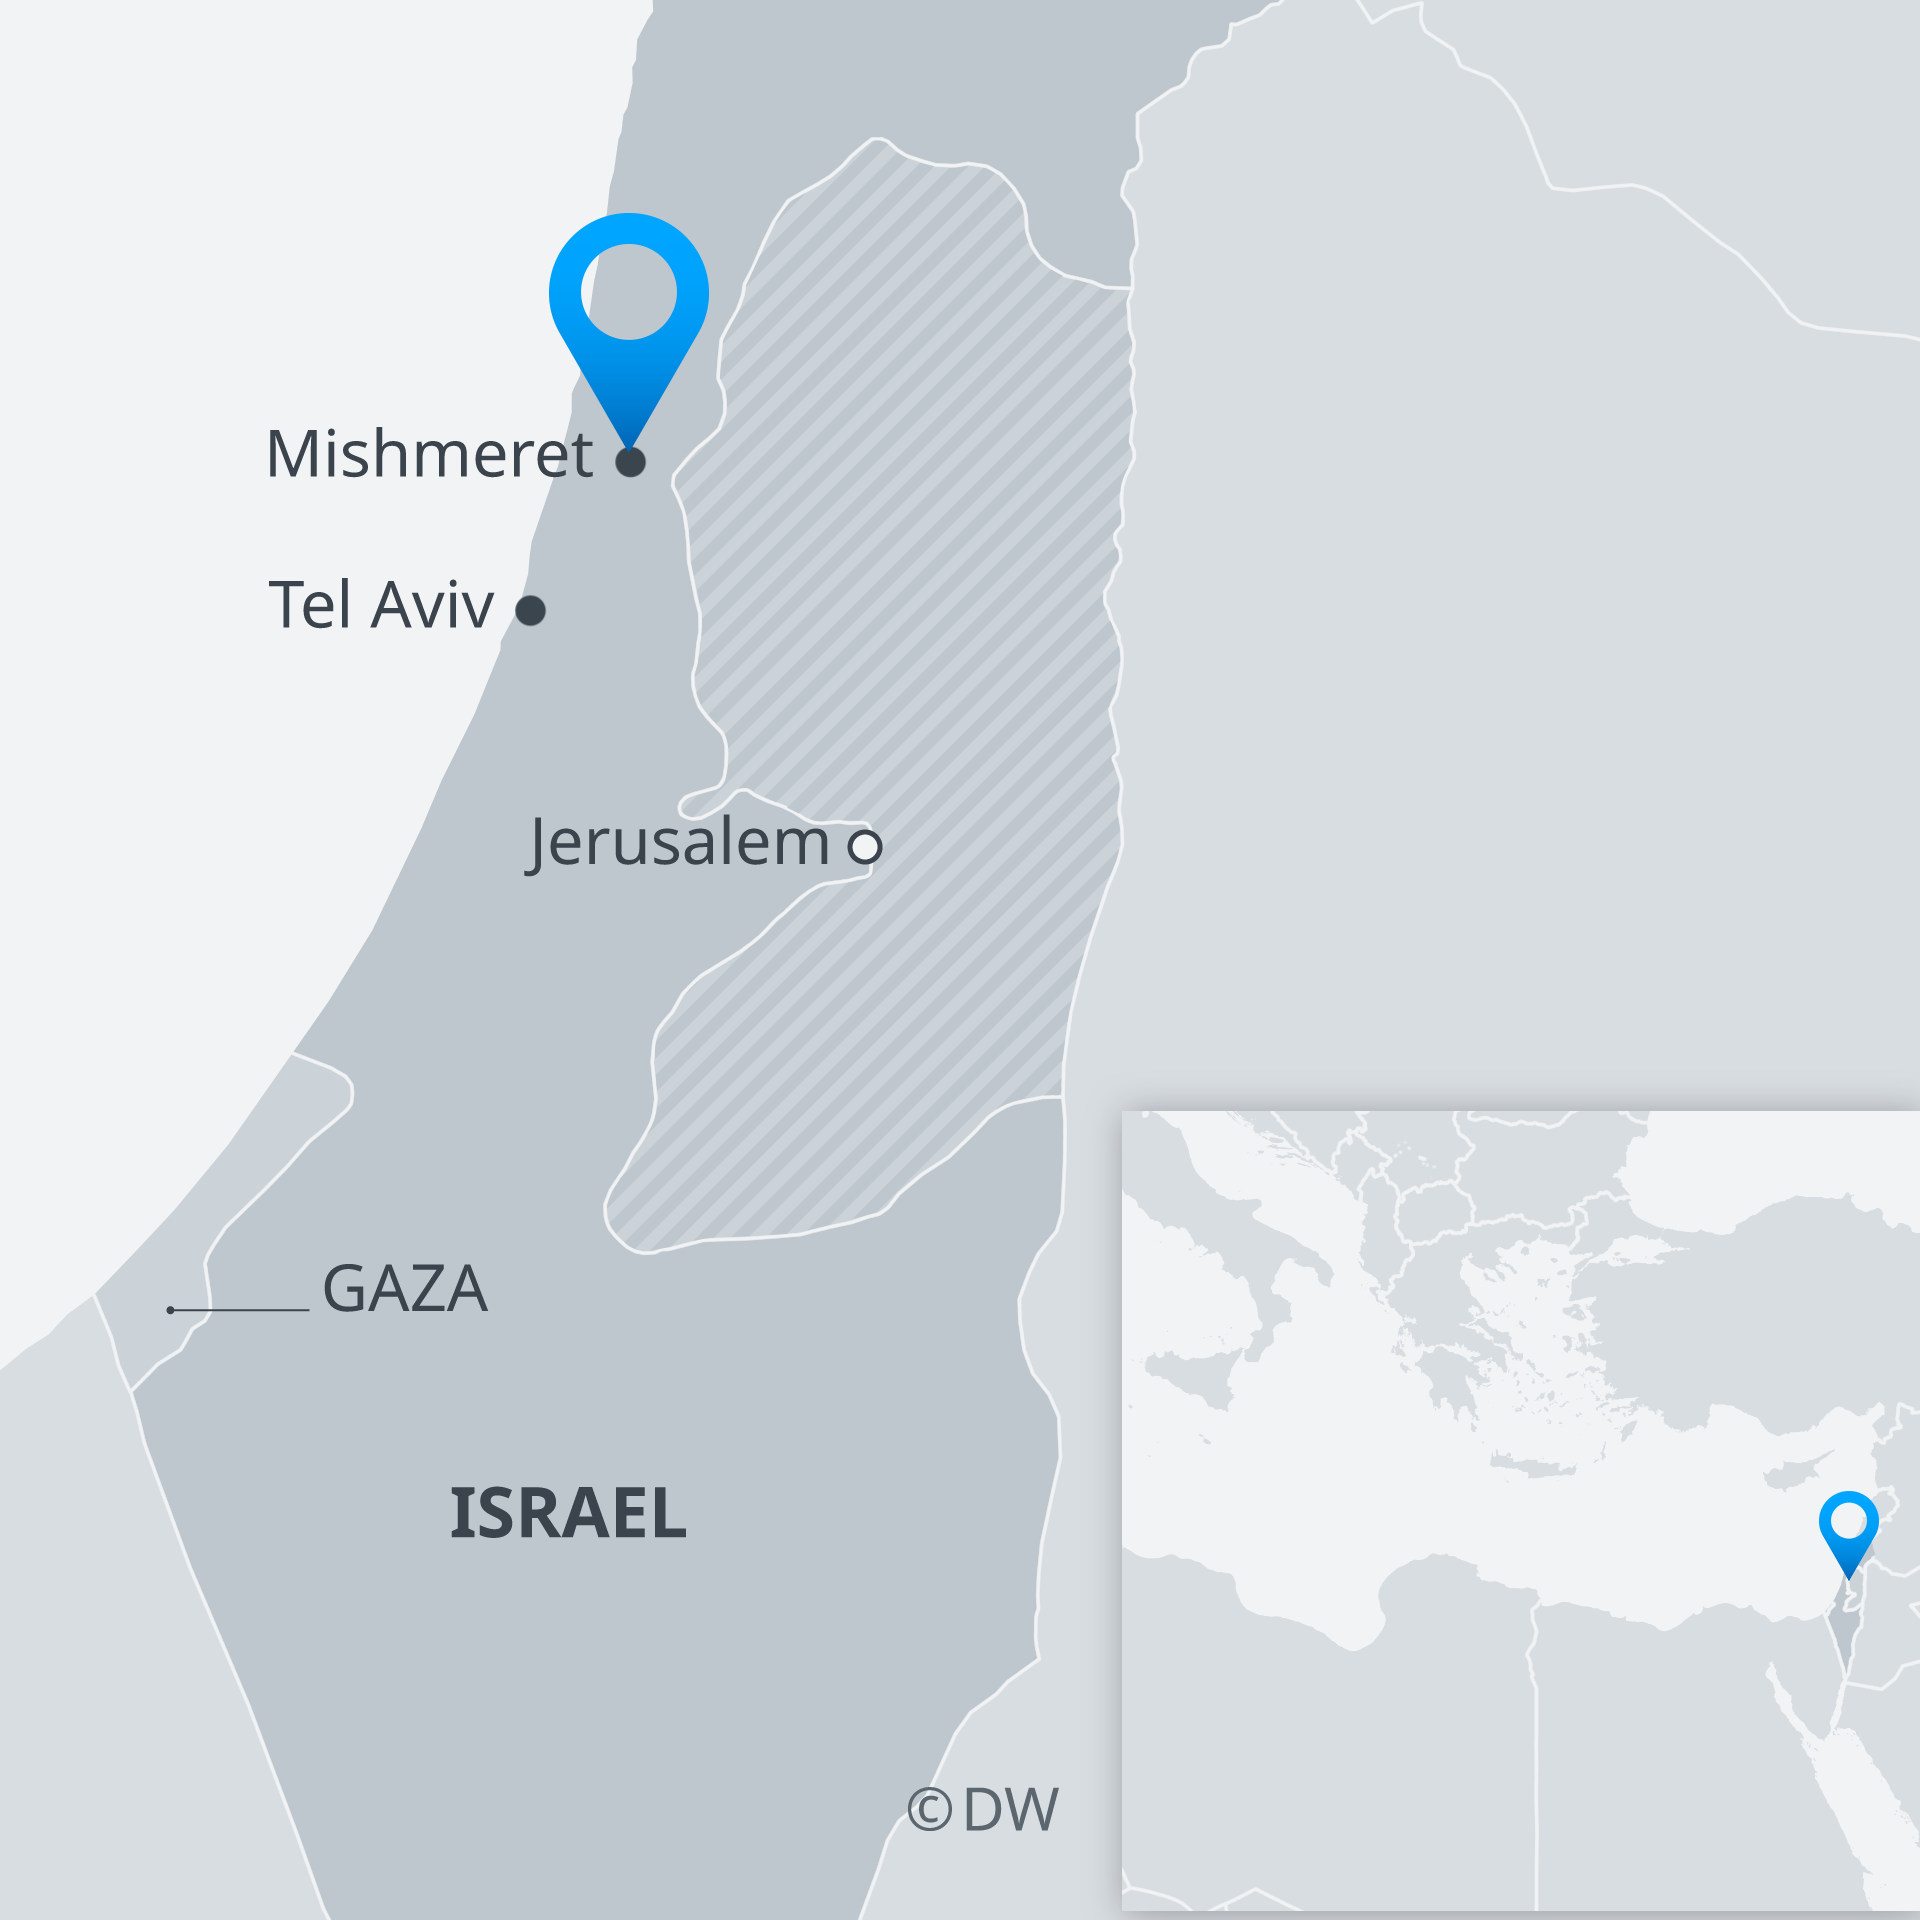 Map of Israel showing Mishmeret